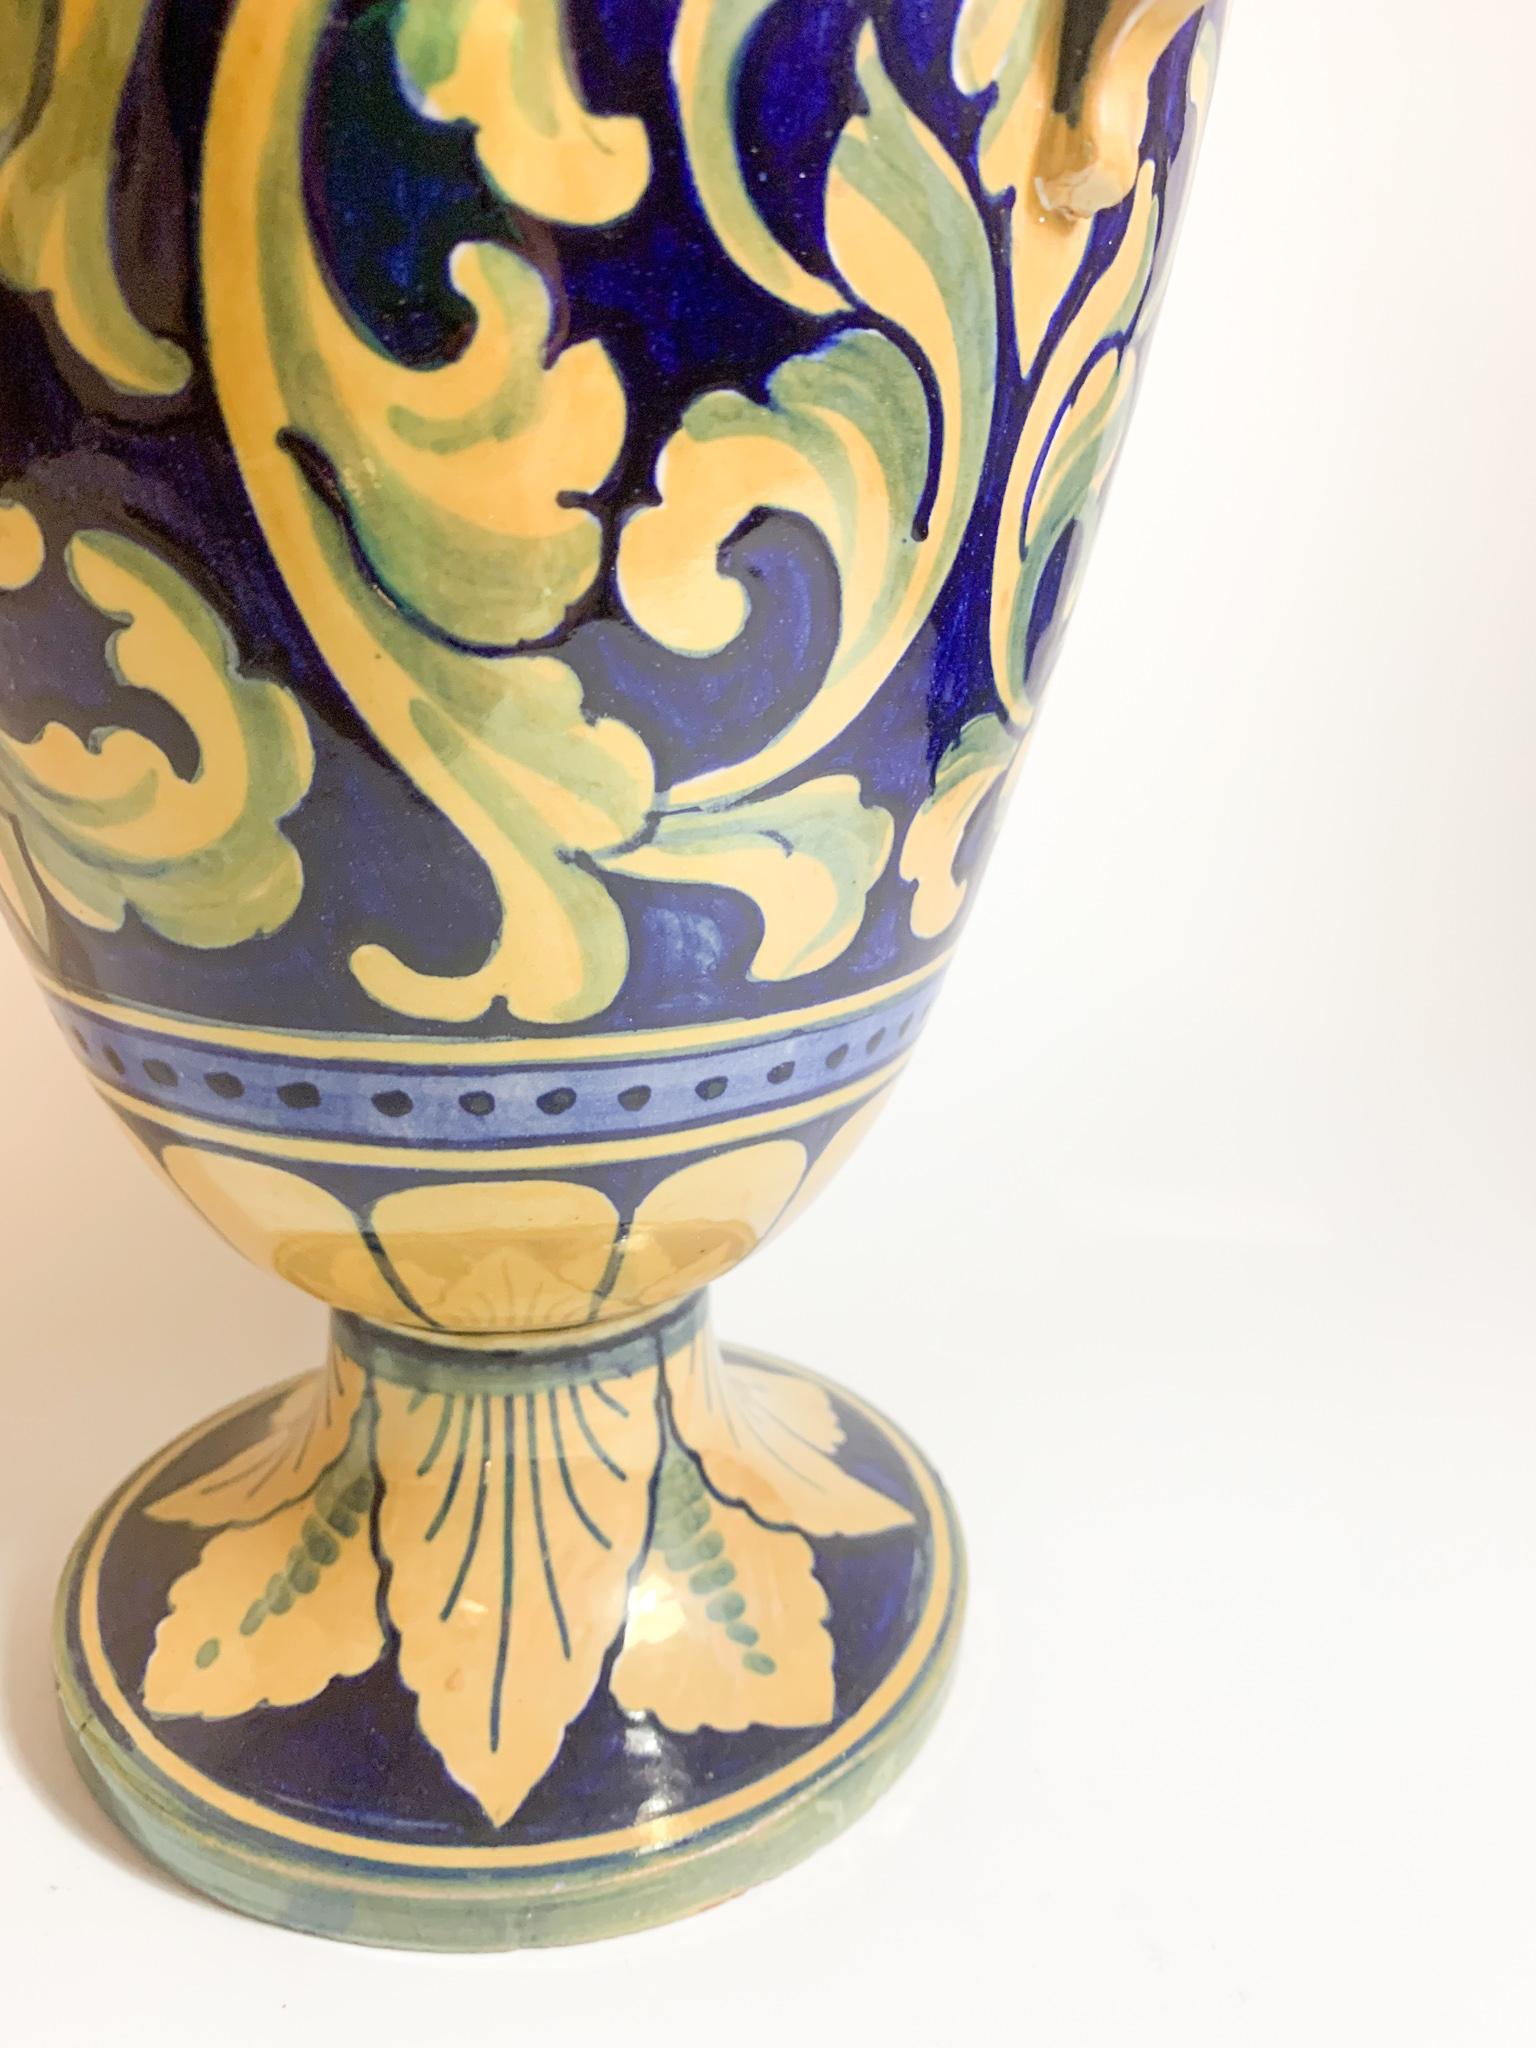 Italian Hand Painted Iridescent Ceramic Vase by Gualdo Tadino from the 1950s For Sale 2